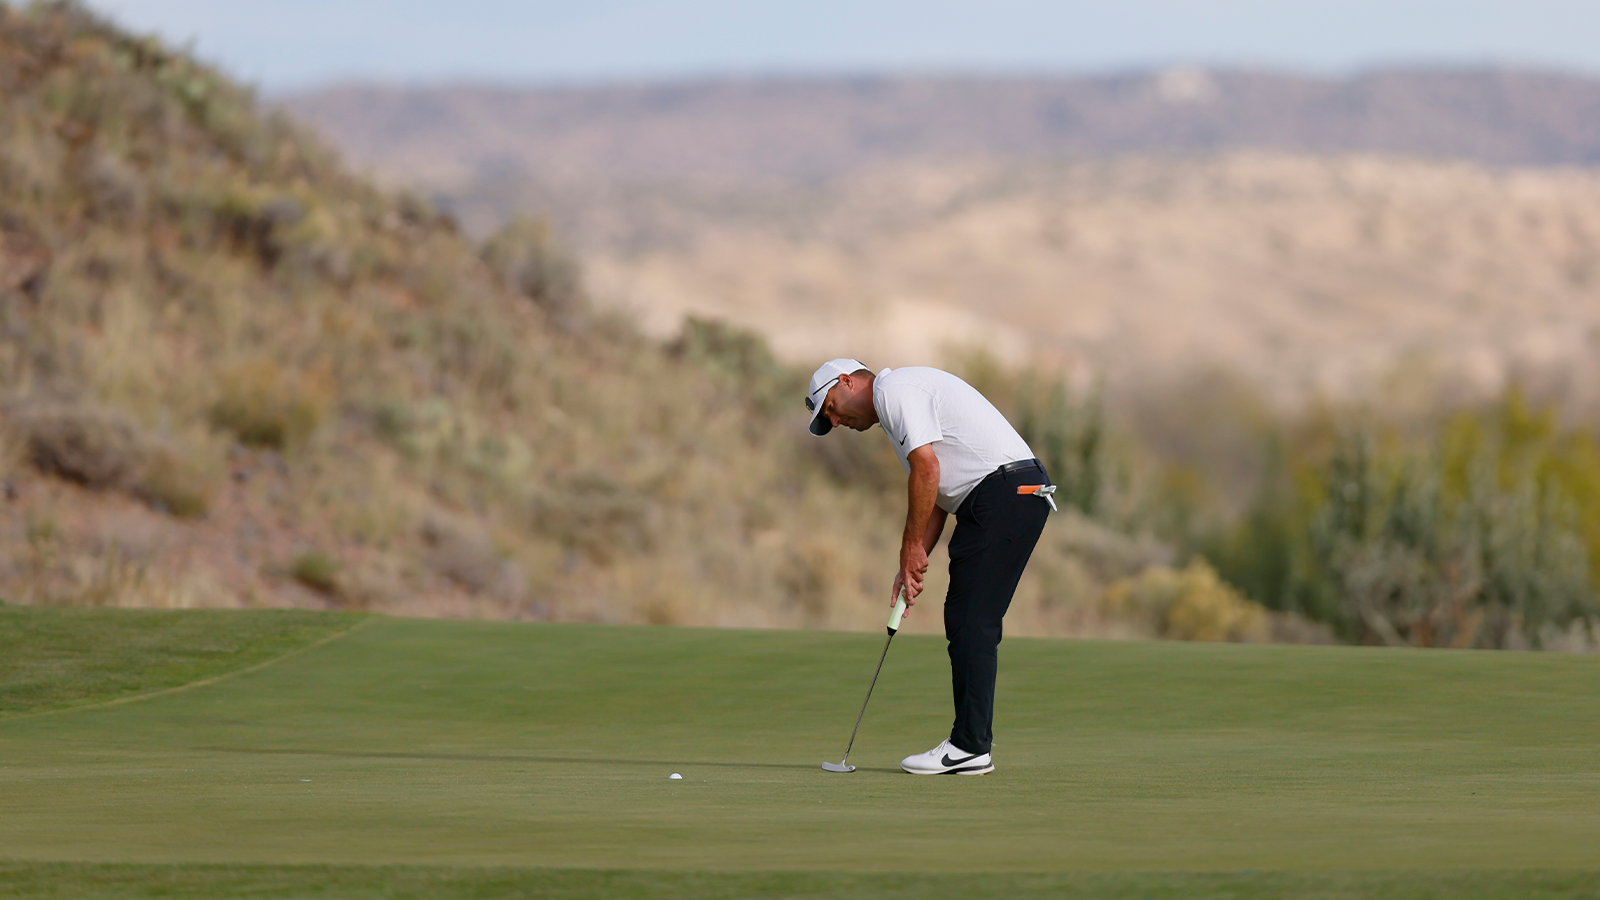 Matt Schalk makes a putt for birdie on the 16th hole during the third round of the 34th Senior PGA Professional Championship at Twin Warriors Golf Club on October 15, 2022 in Santa Ana Pueblo, New Mexico. (Photo by Justin Edmonds/PGA of America)